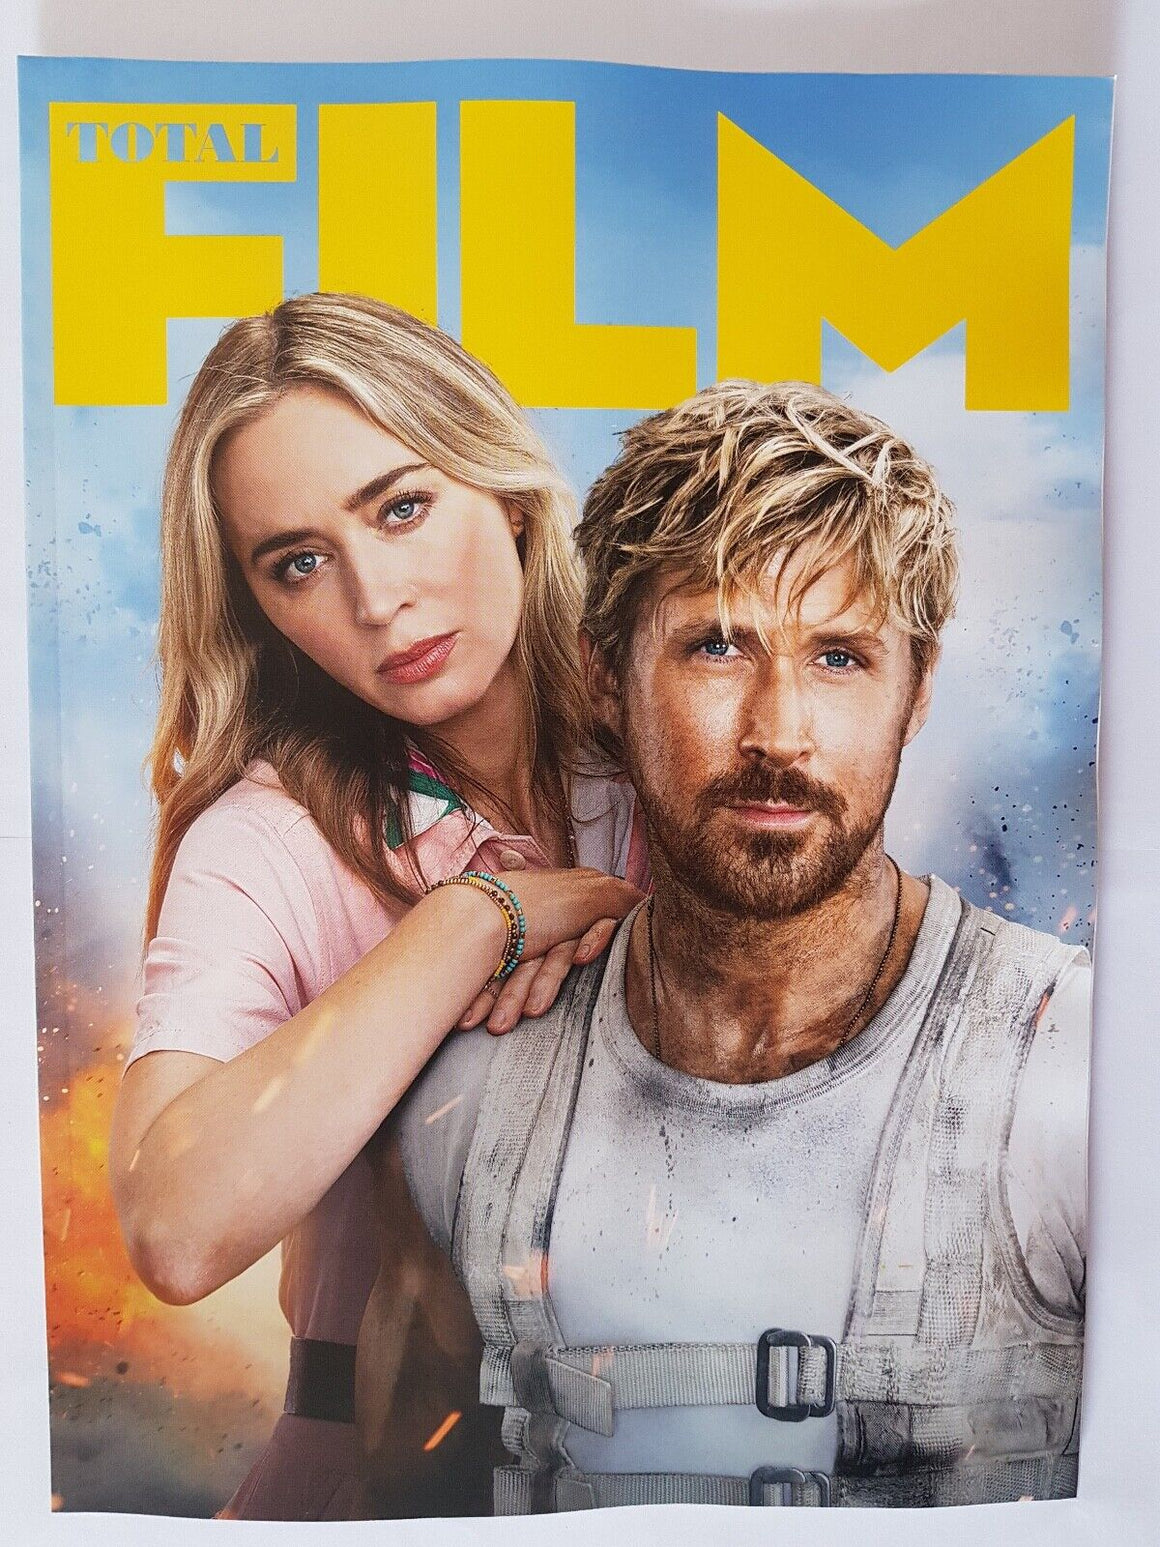 TOTAL FILM Magazine #349 Subscribers Cover THE FALL GUY Ryan Gosling Emily Blunt